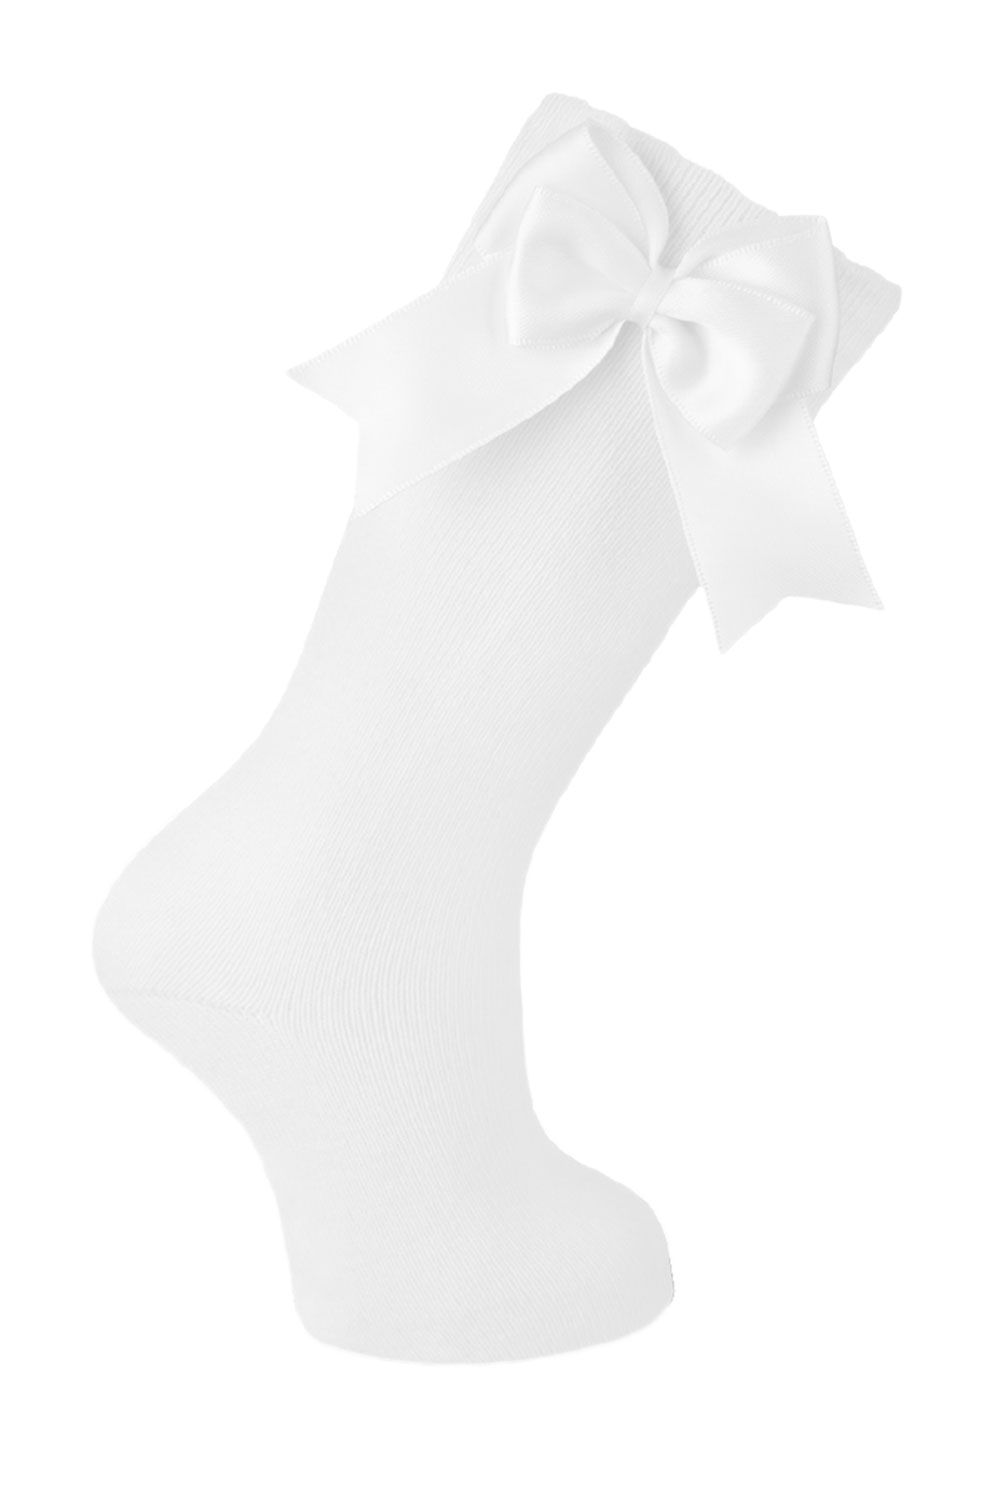 Cotton Knee Socks with Double Bow - White